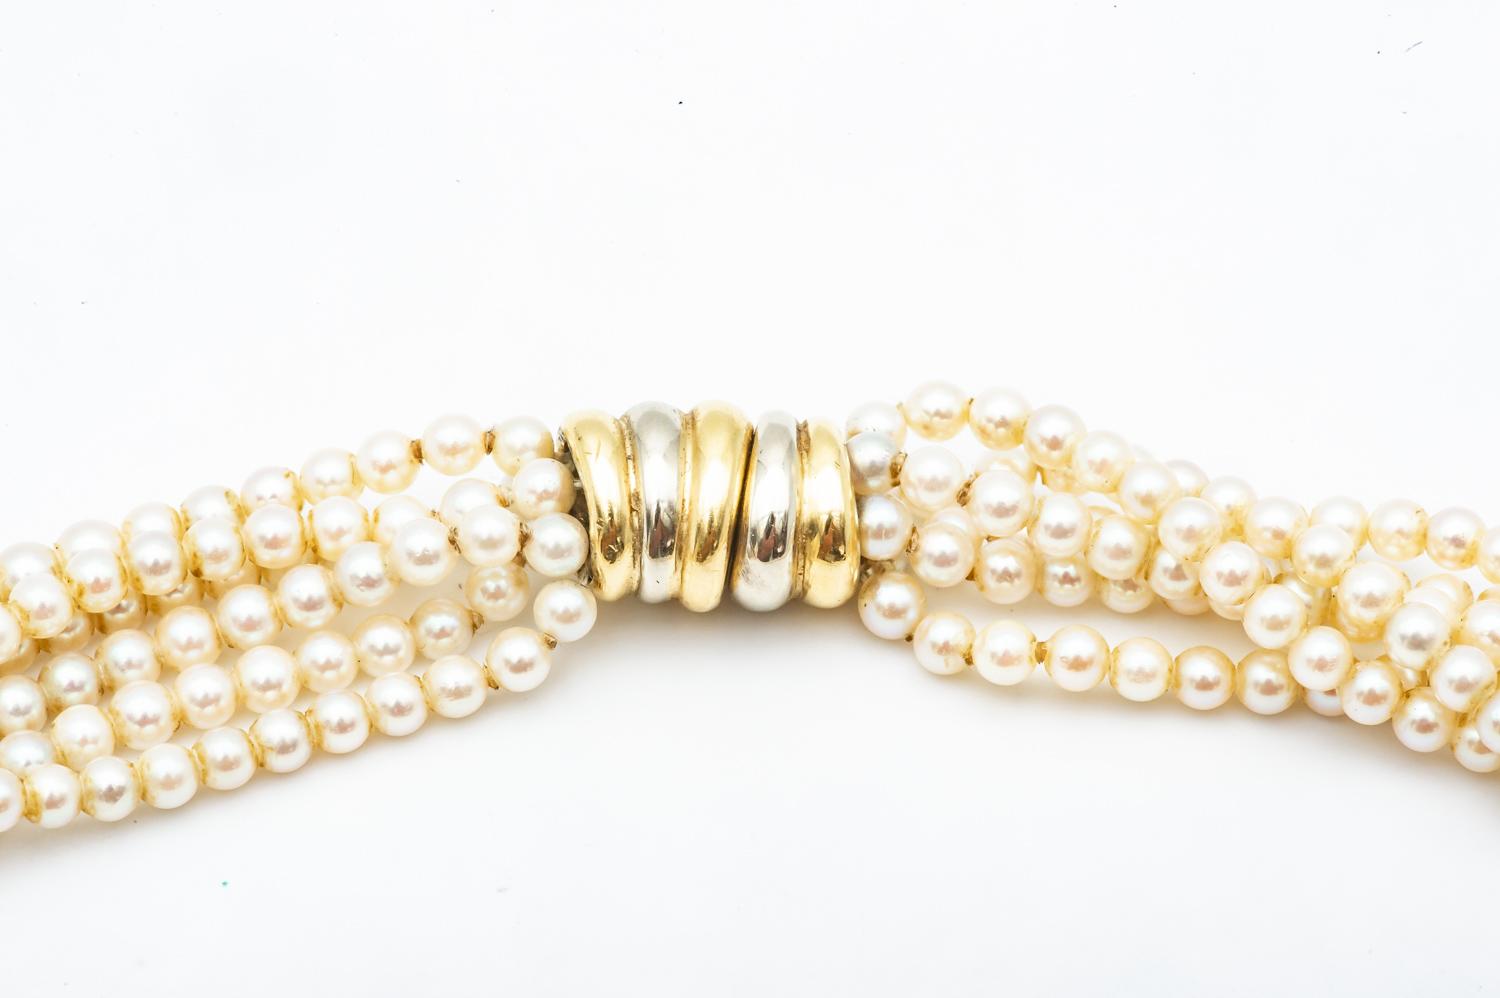 Art Deco 6 Row Cultured Pearls Necklace with 18K Yellow and White Gold Clasp